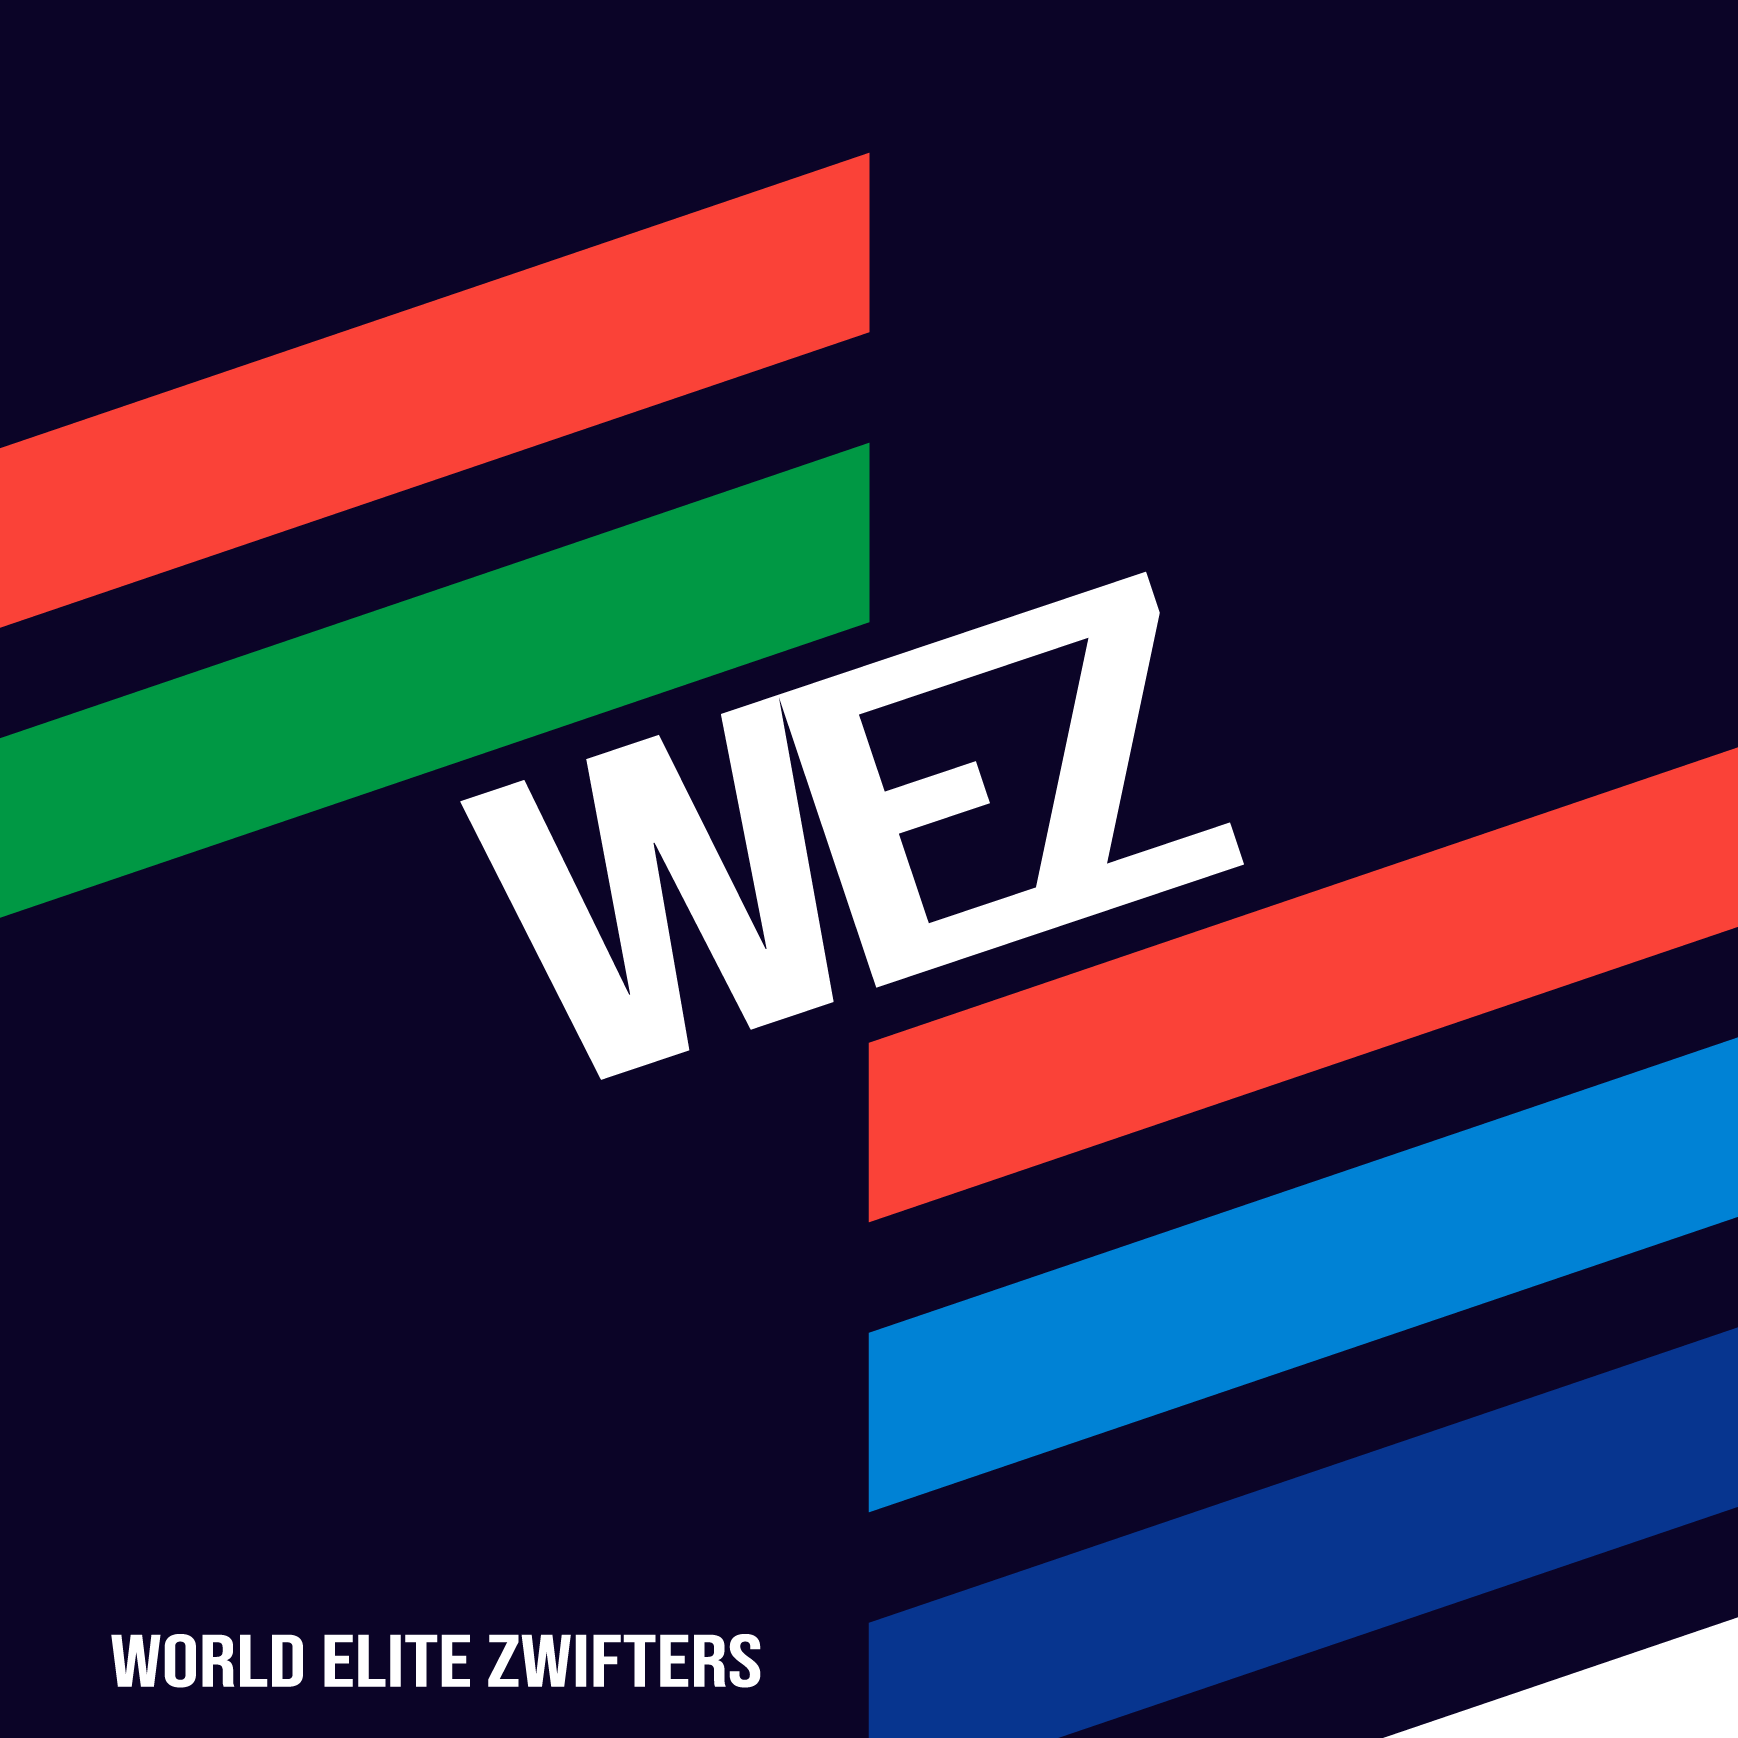 Club Image for WORLD ELITE ZWIFTERS